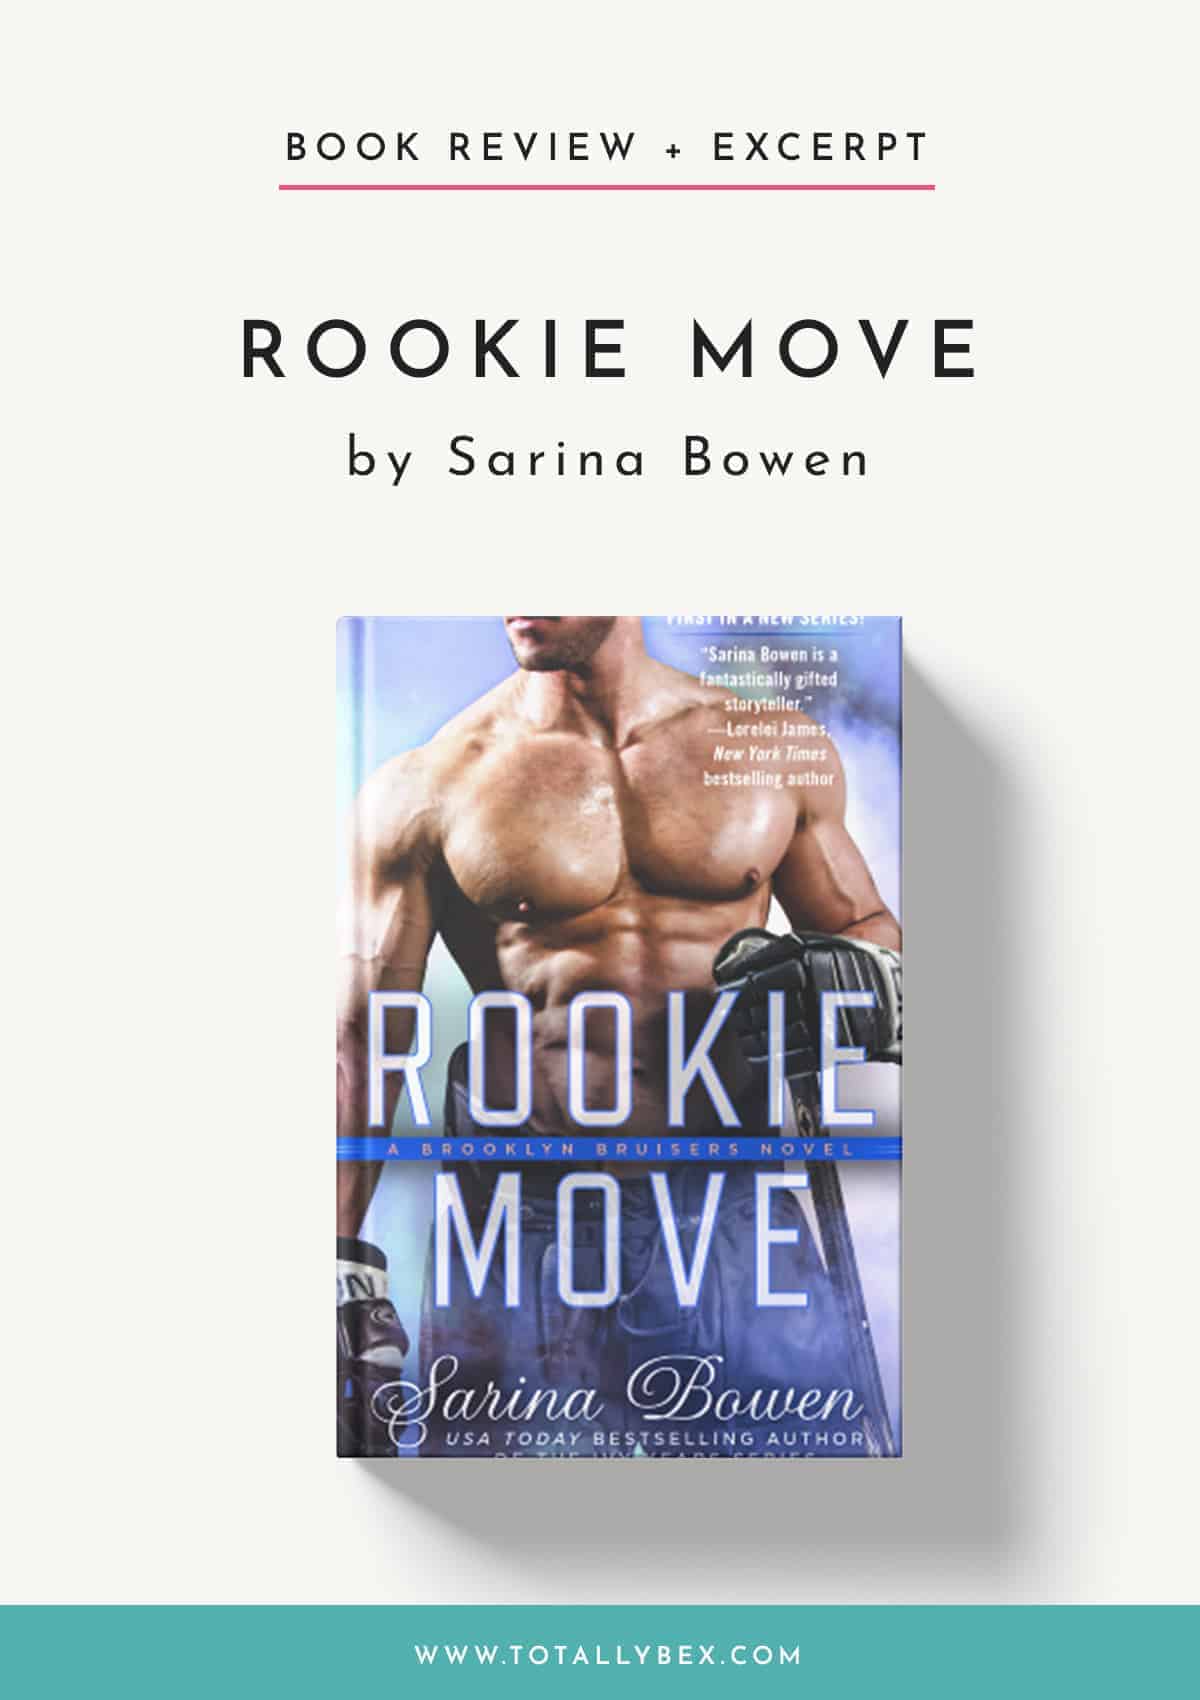 Rookie Move by Sarina Bowen – Read My Review + an Excerpt!